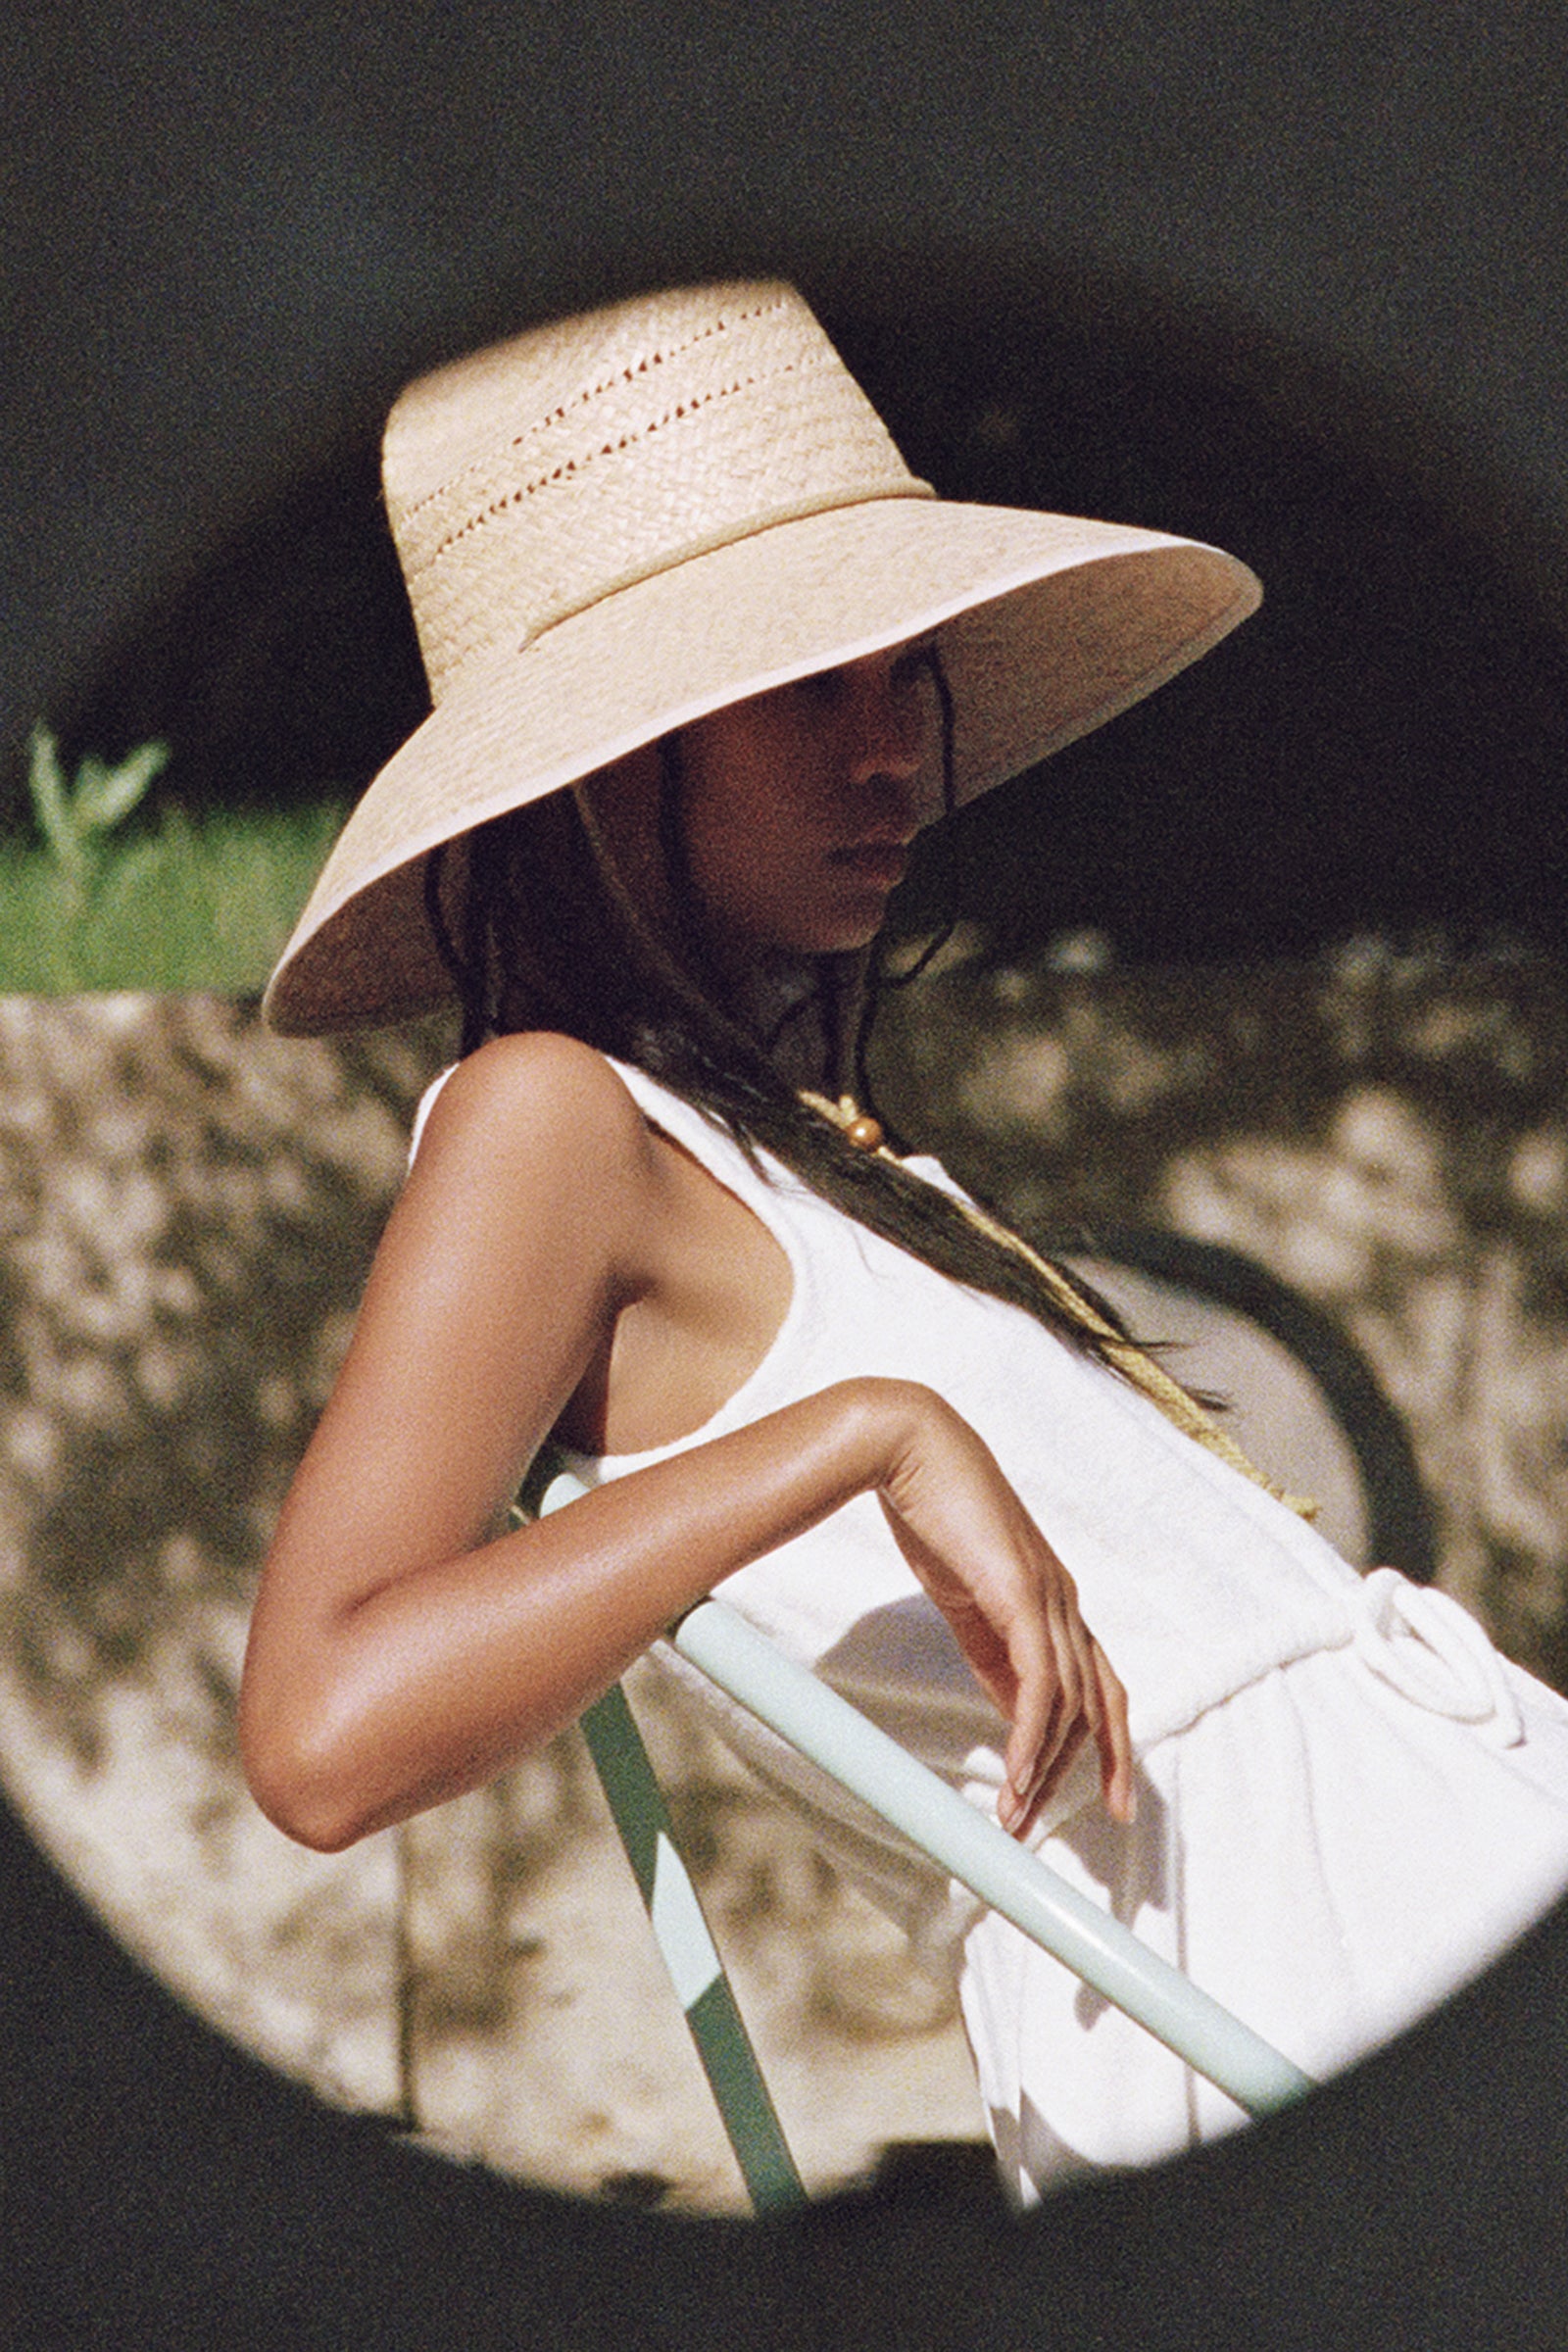 The Vista - Straw Cowboy Hat in Natural | Lack of Color US